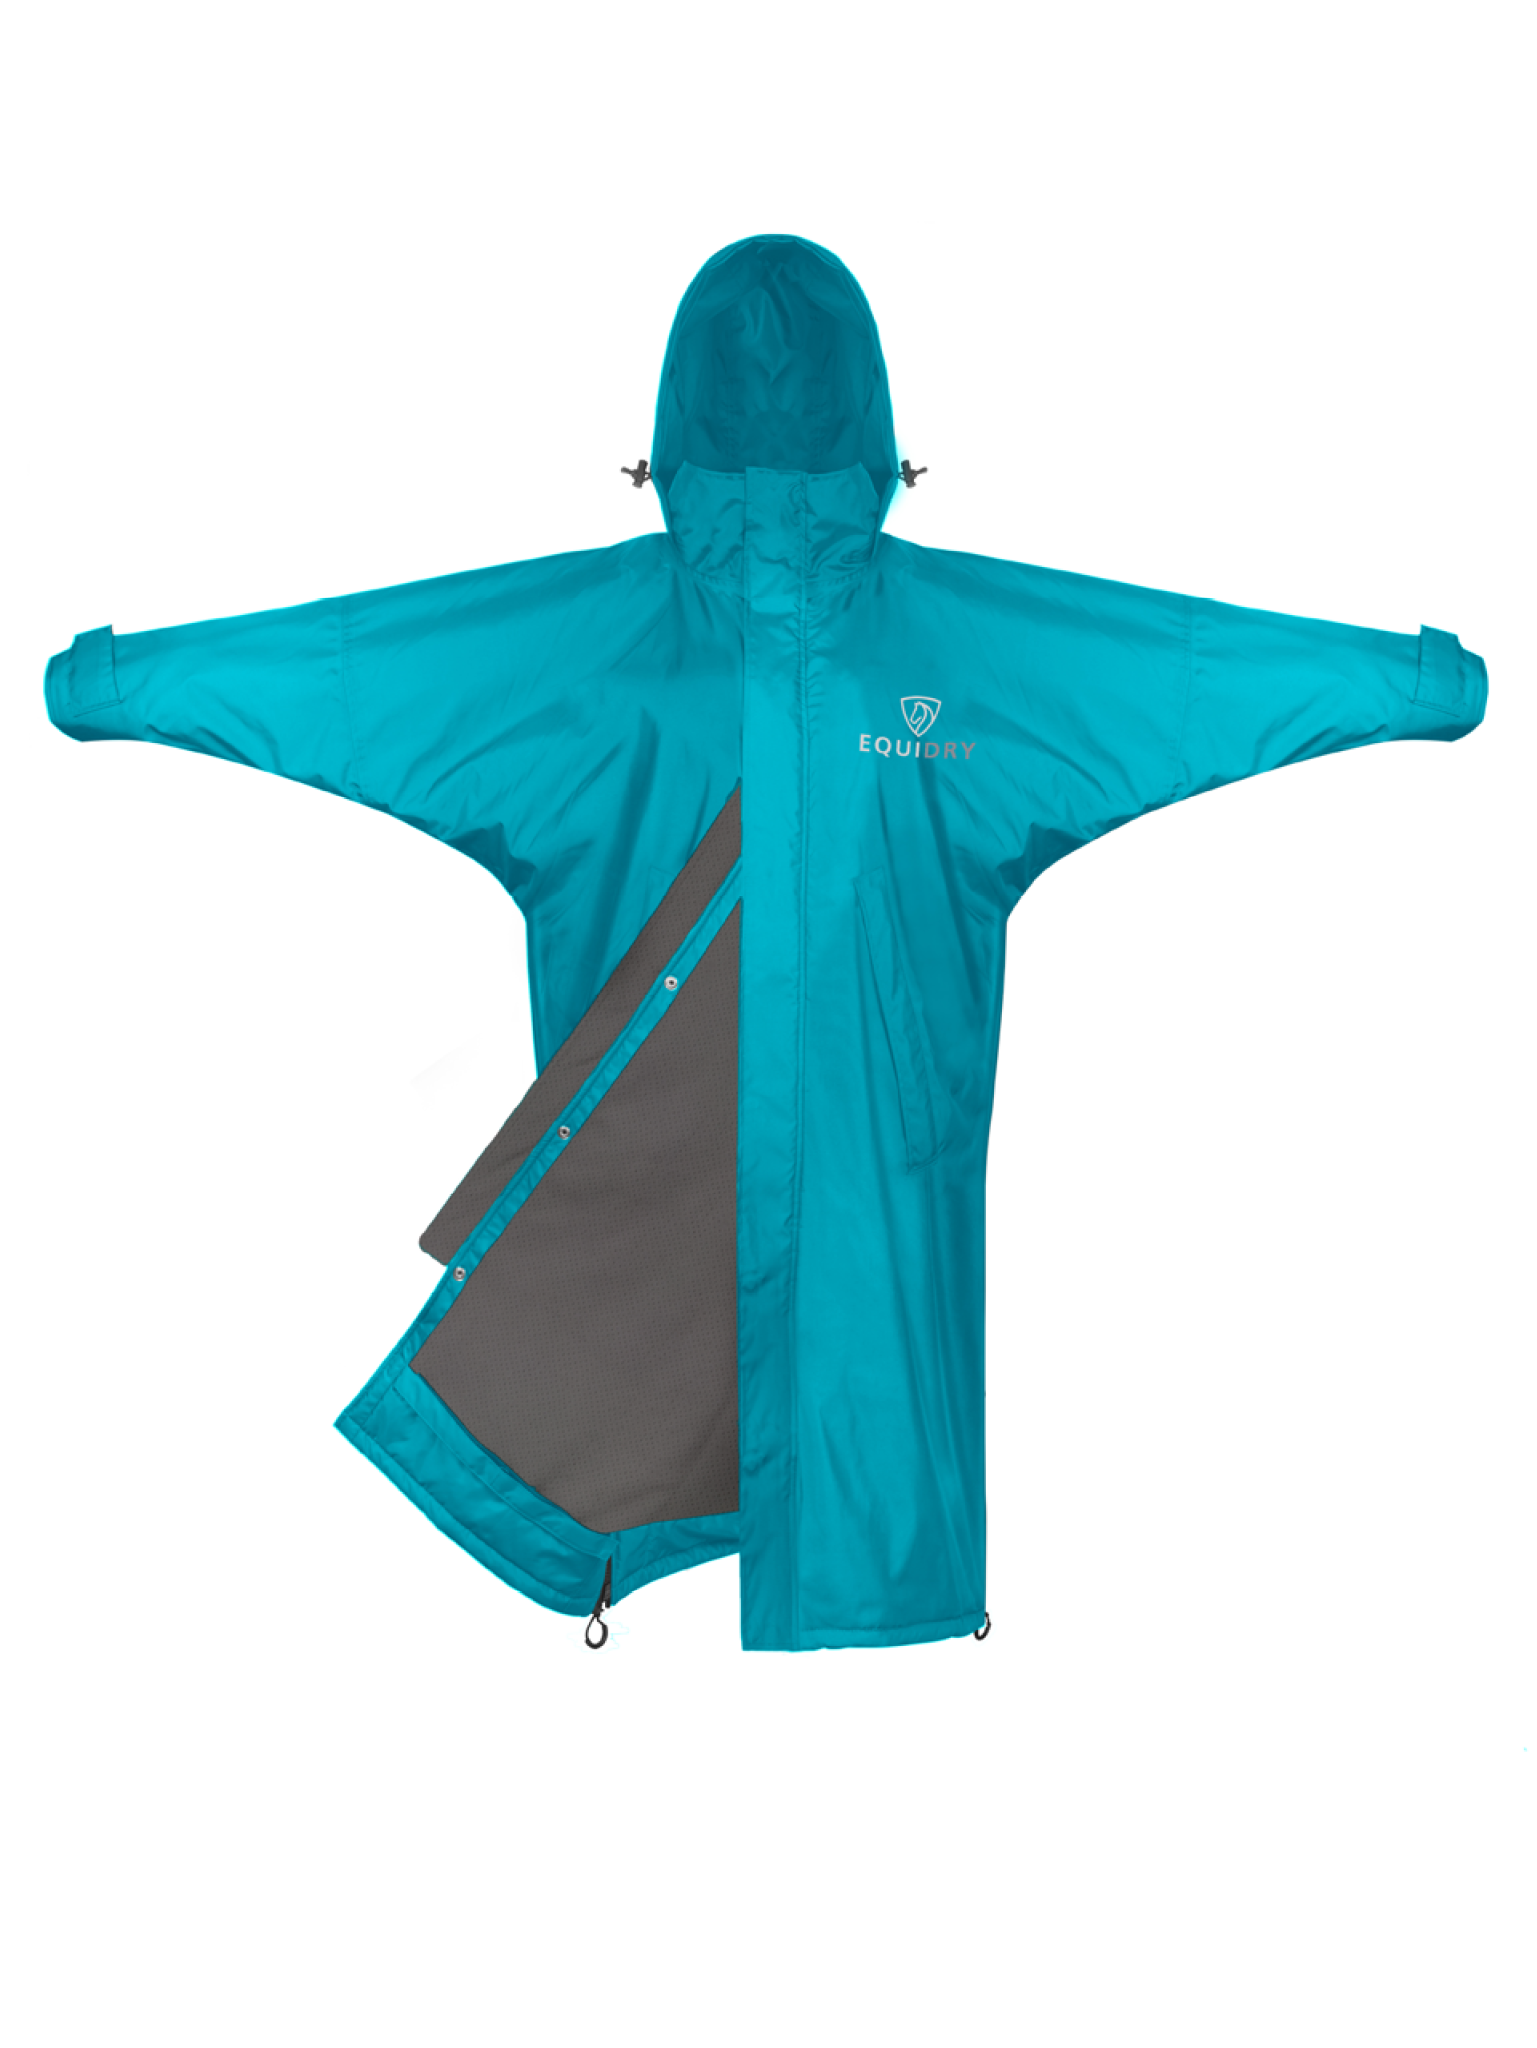 Equimac_turquoise_front_f6dd6051-5dbc-4a0b-964e-9ede13923f38.png